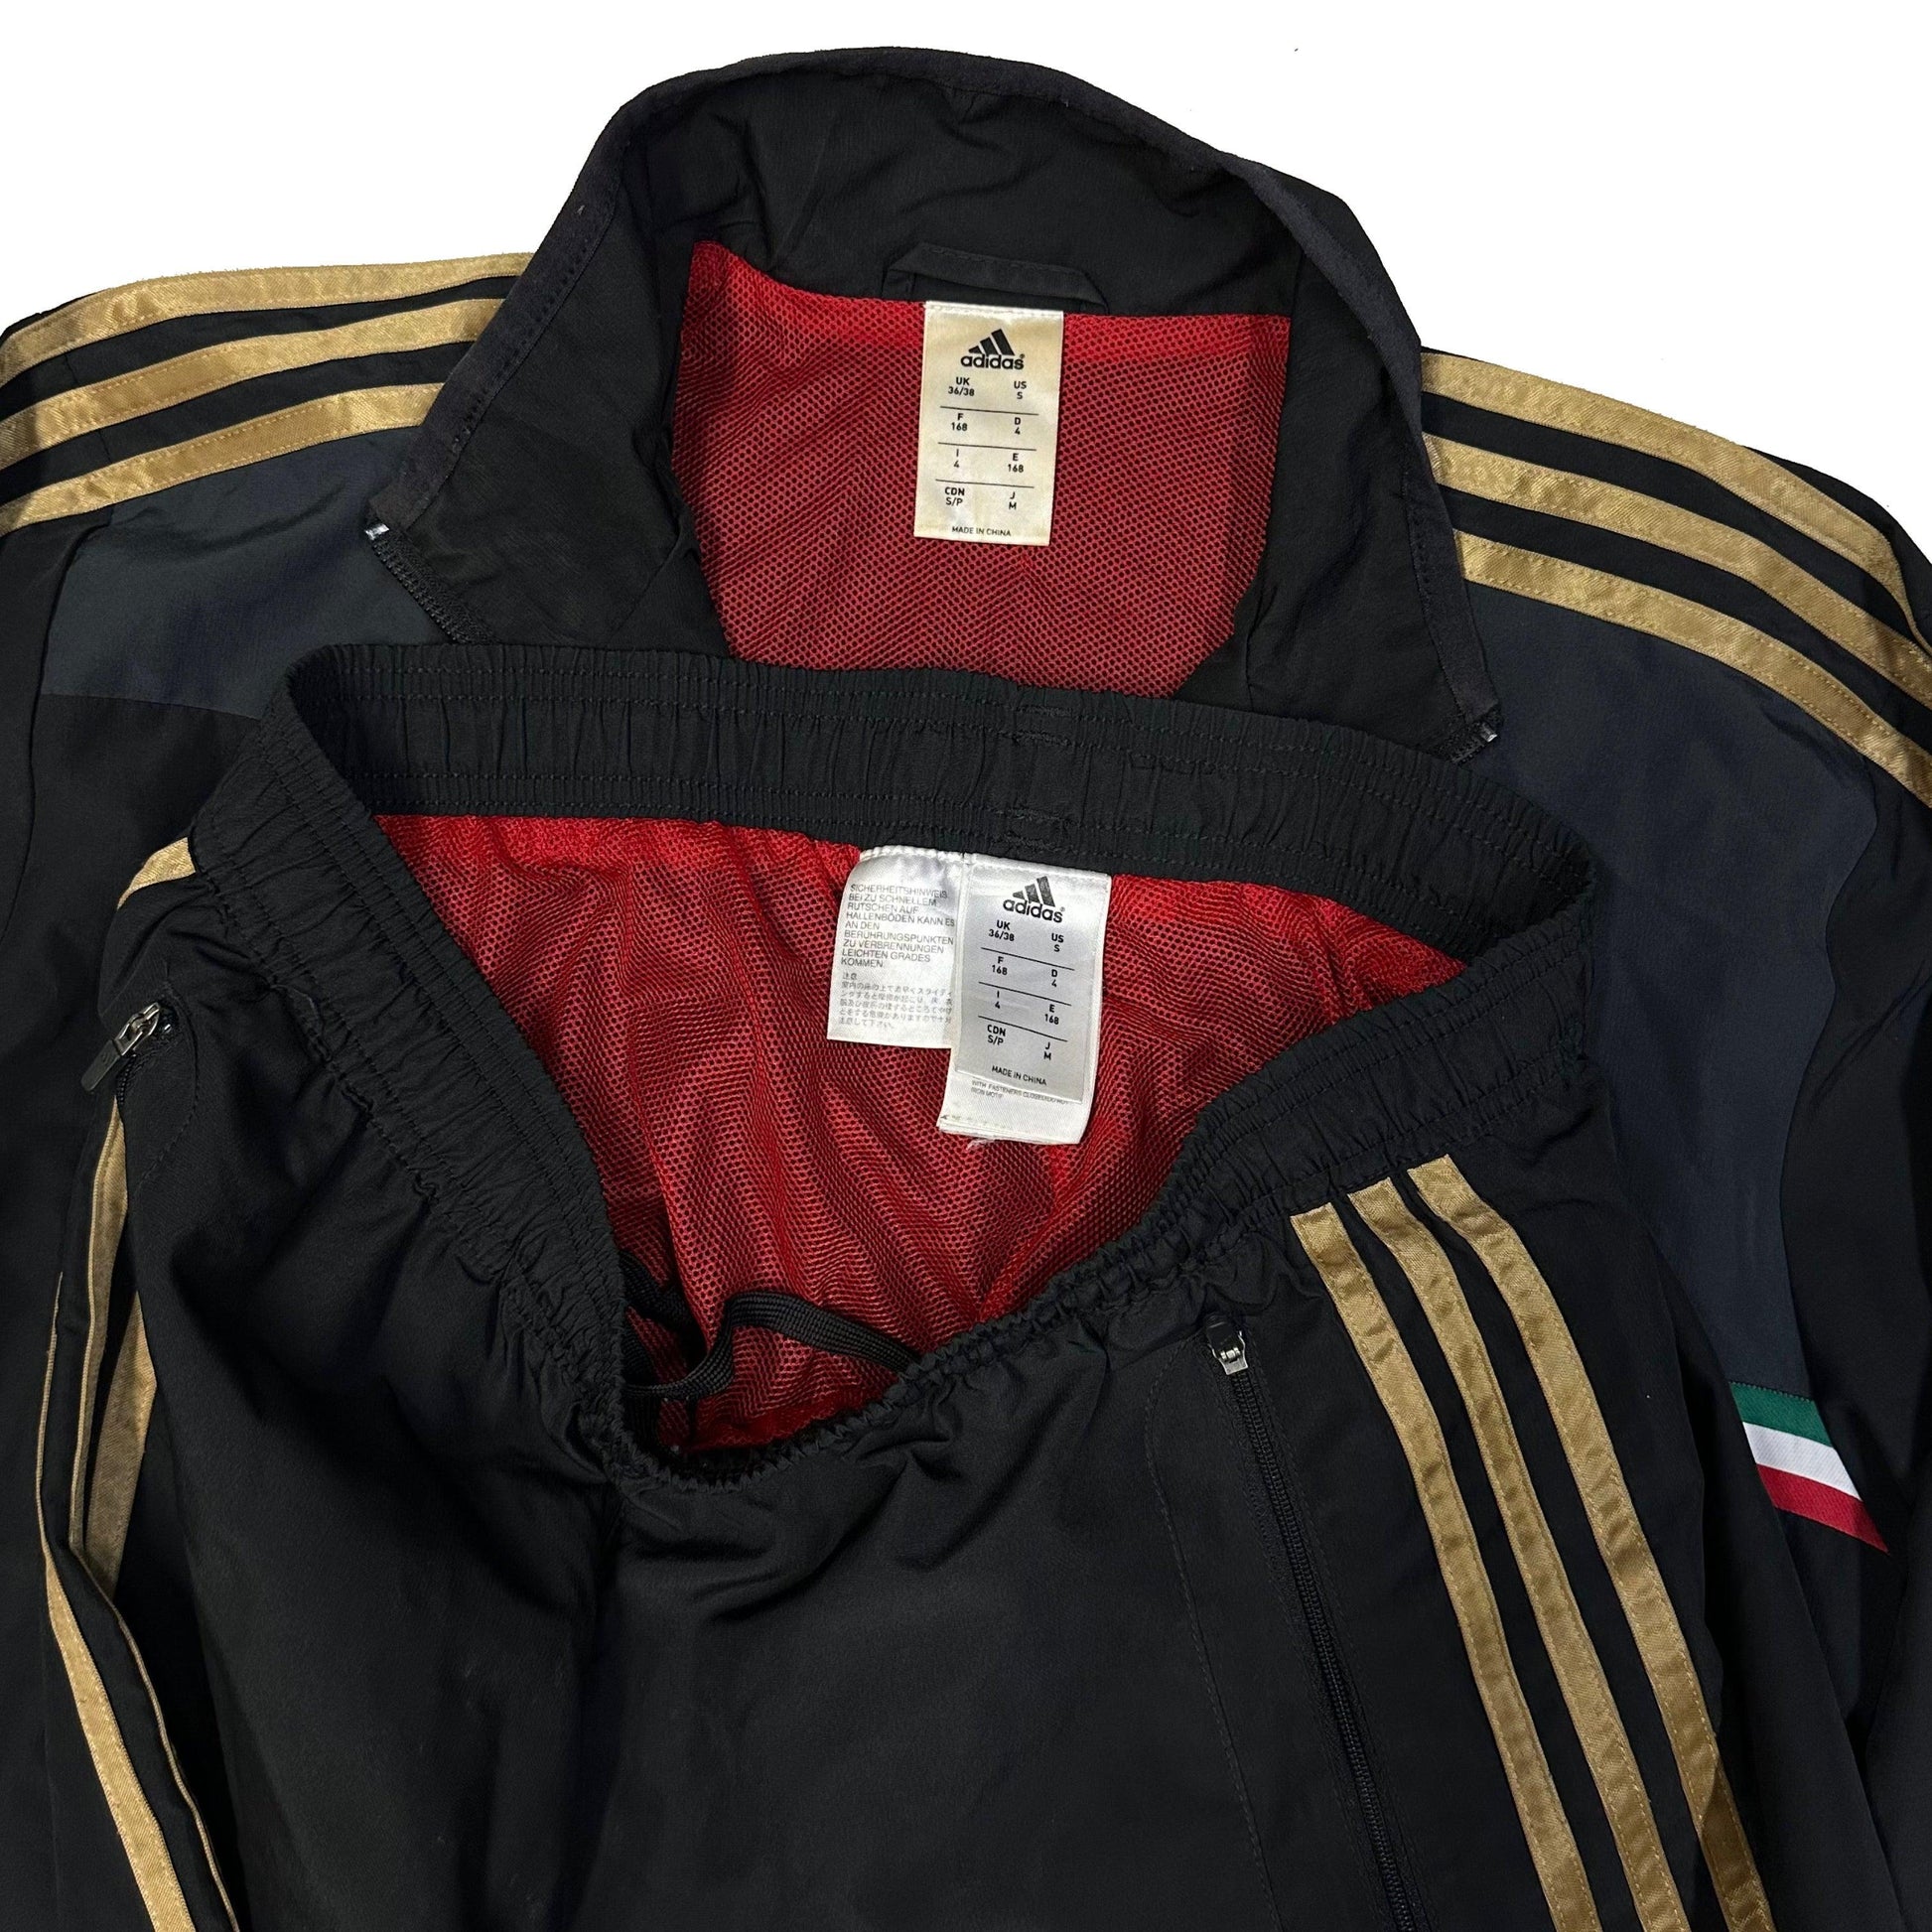 Adidas AC Milan 2013/14 Tracksuit ( S ) - Known Source